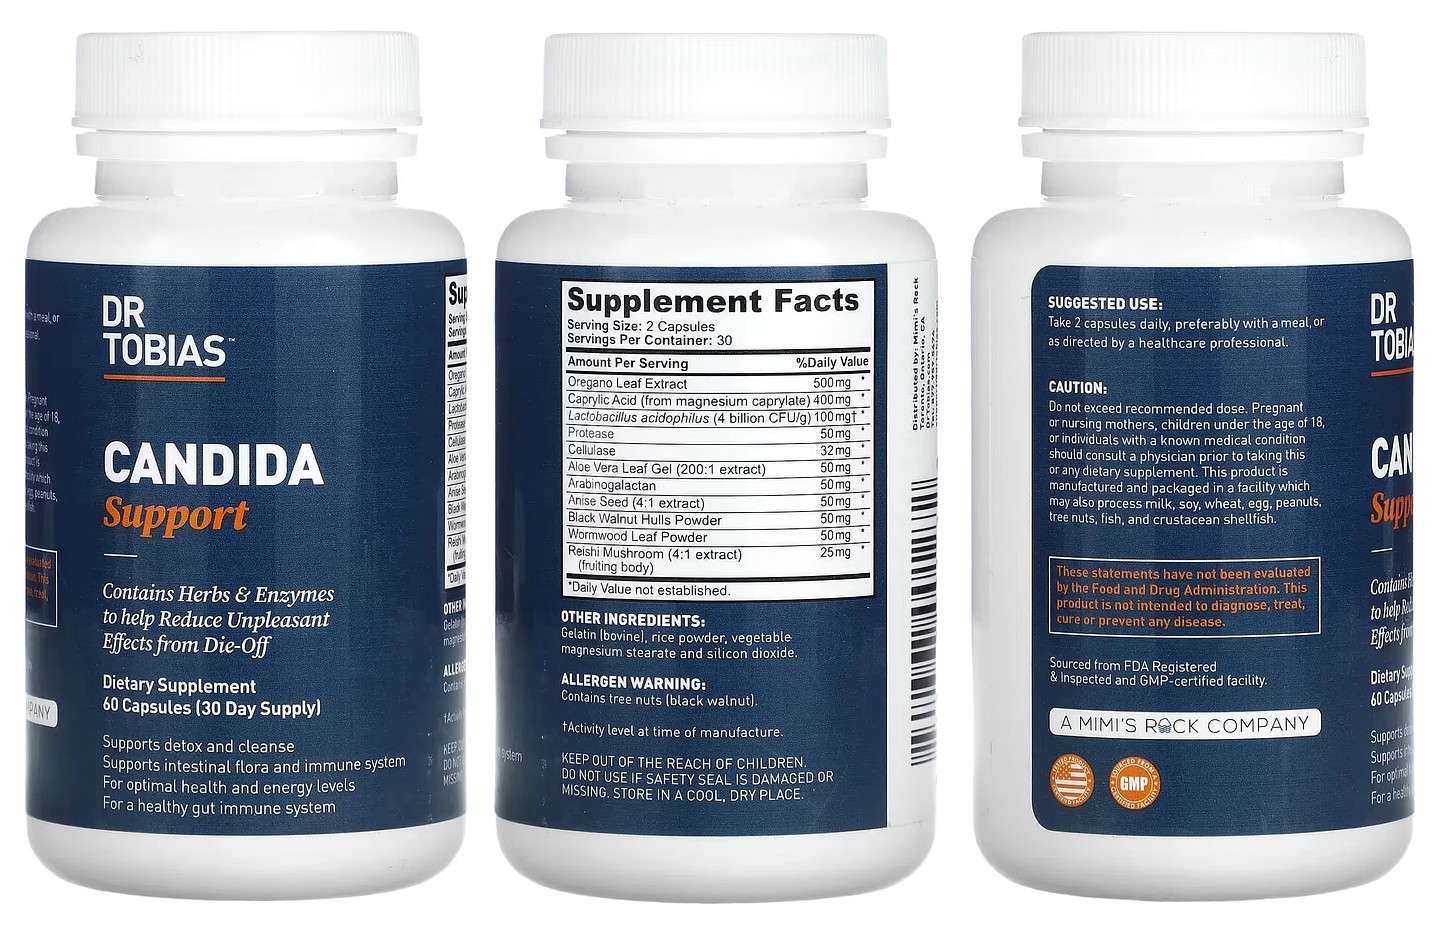 Dr. Tobias, Candida Support packaging